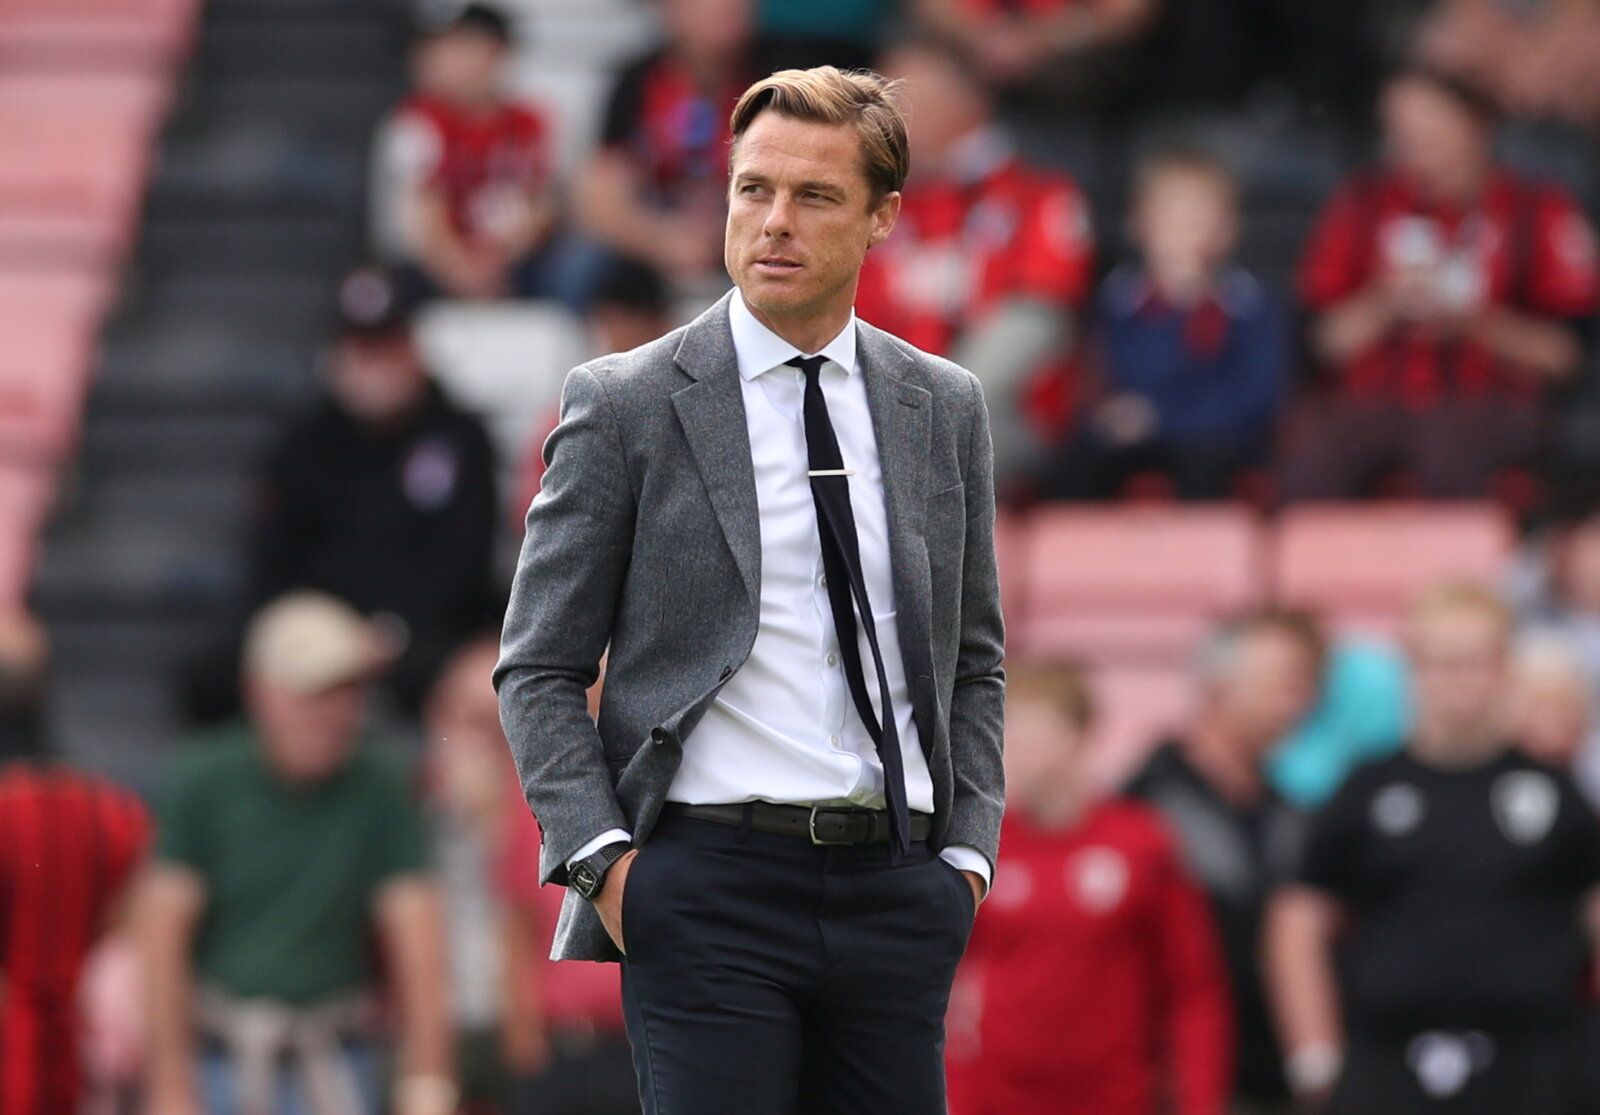 Soccer Football - Championship - AFC Bournemouth v Barnsley - Vitality Stadium, Bournemouth, Britain - September 11, 2021 AFC Bournemouth manager Scott Parker before the match  Action Images/Peter Cziborra  EDITORIAL USE ONLY. No use with unauthorized audio, video, data, fixture lists, club/league logos or 